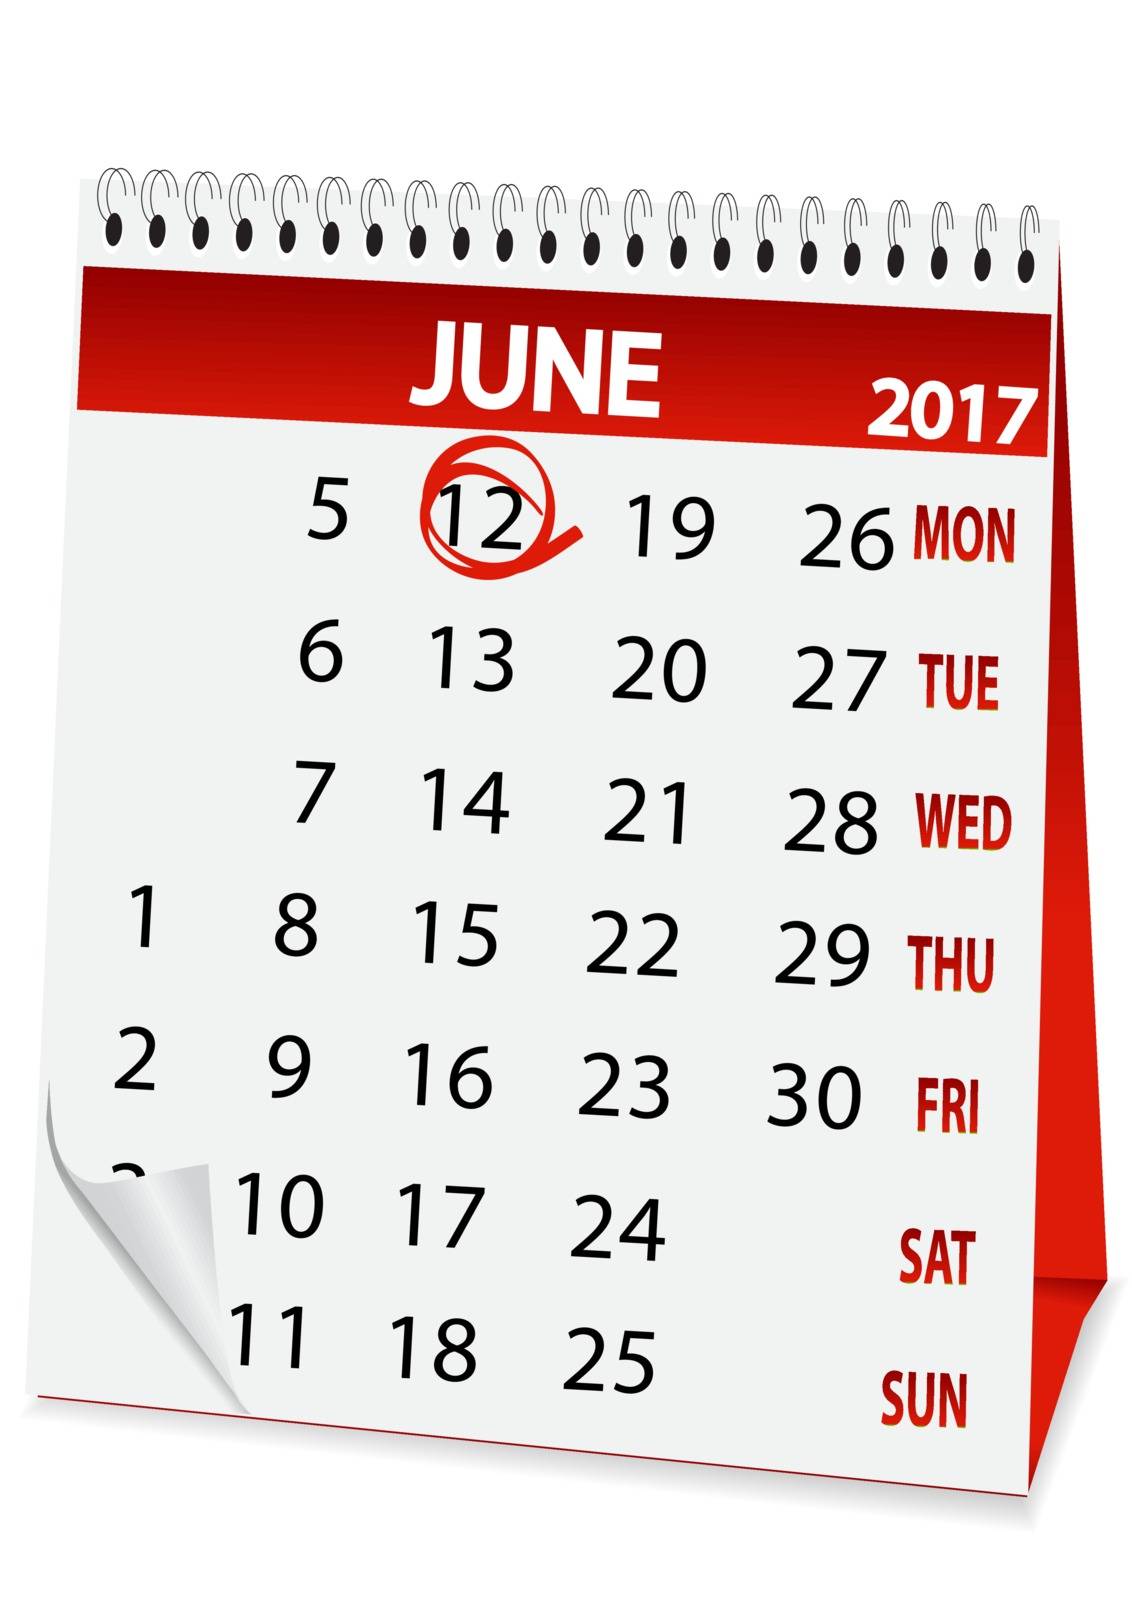 icon in the form of a calendar for June 12, Russia day